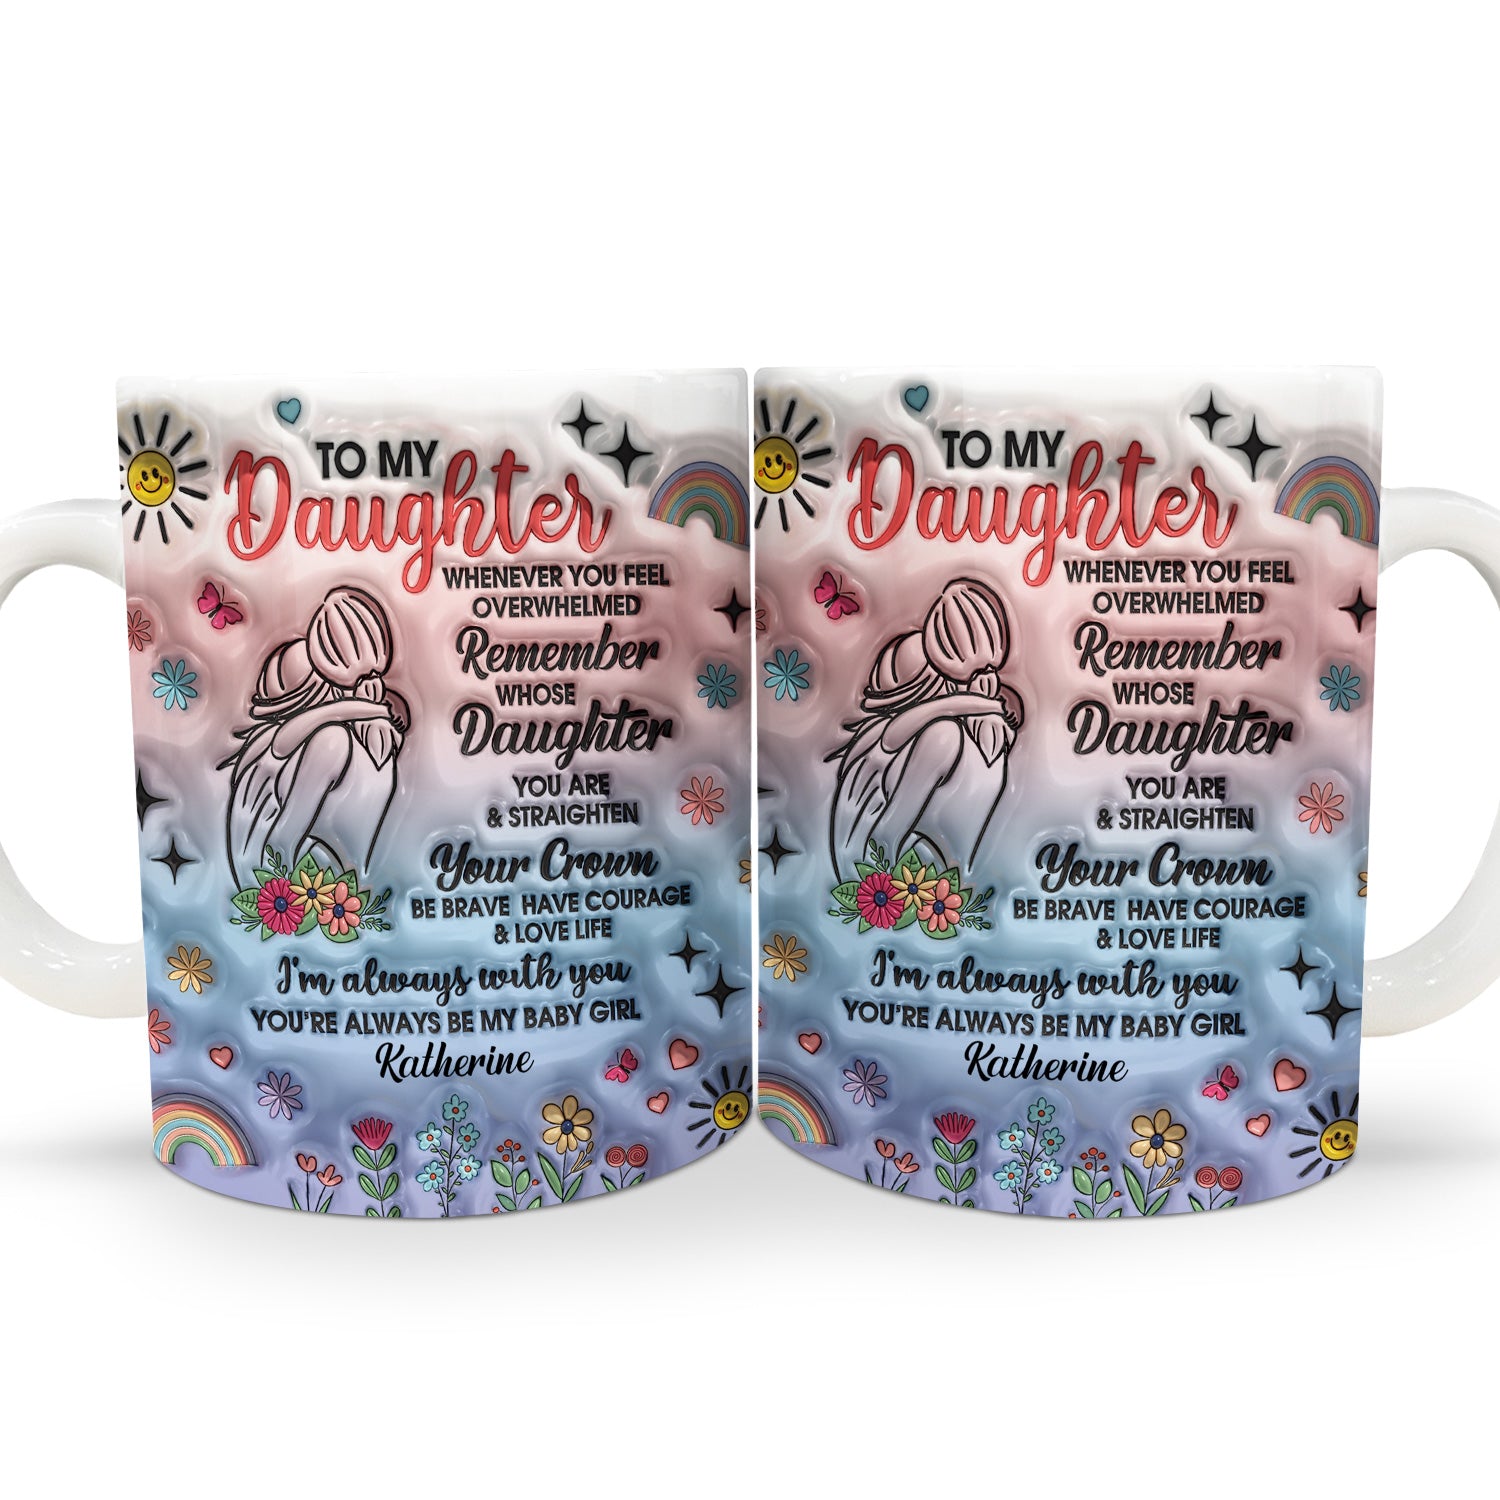 Whenever You Feel Overwhelmed - Gift For Daughter - 3D Inflated Effect Printed Mug, Personalized White Edge-to-Edge Mug